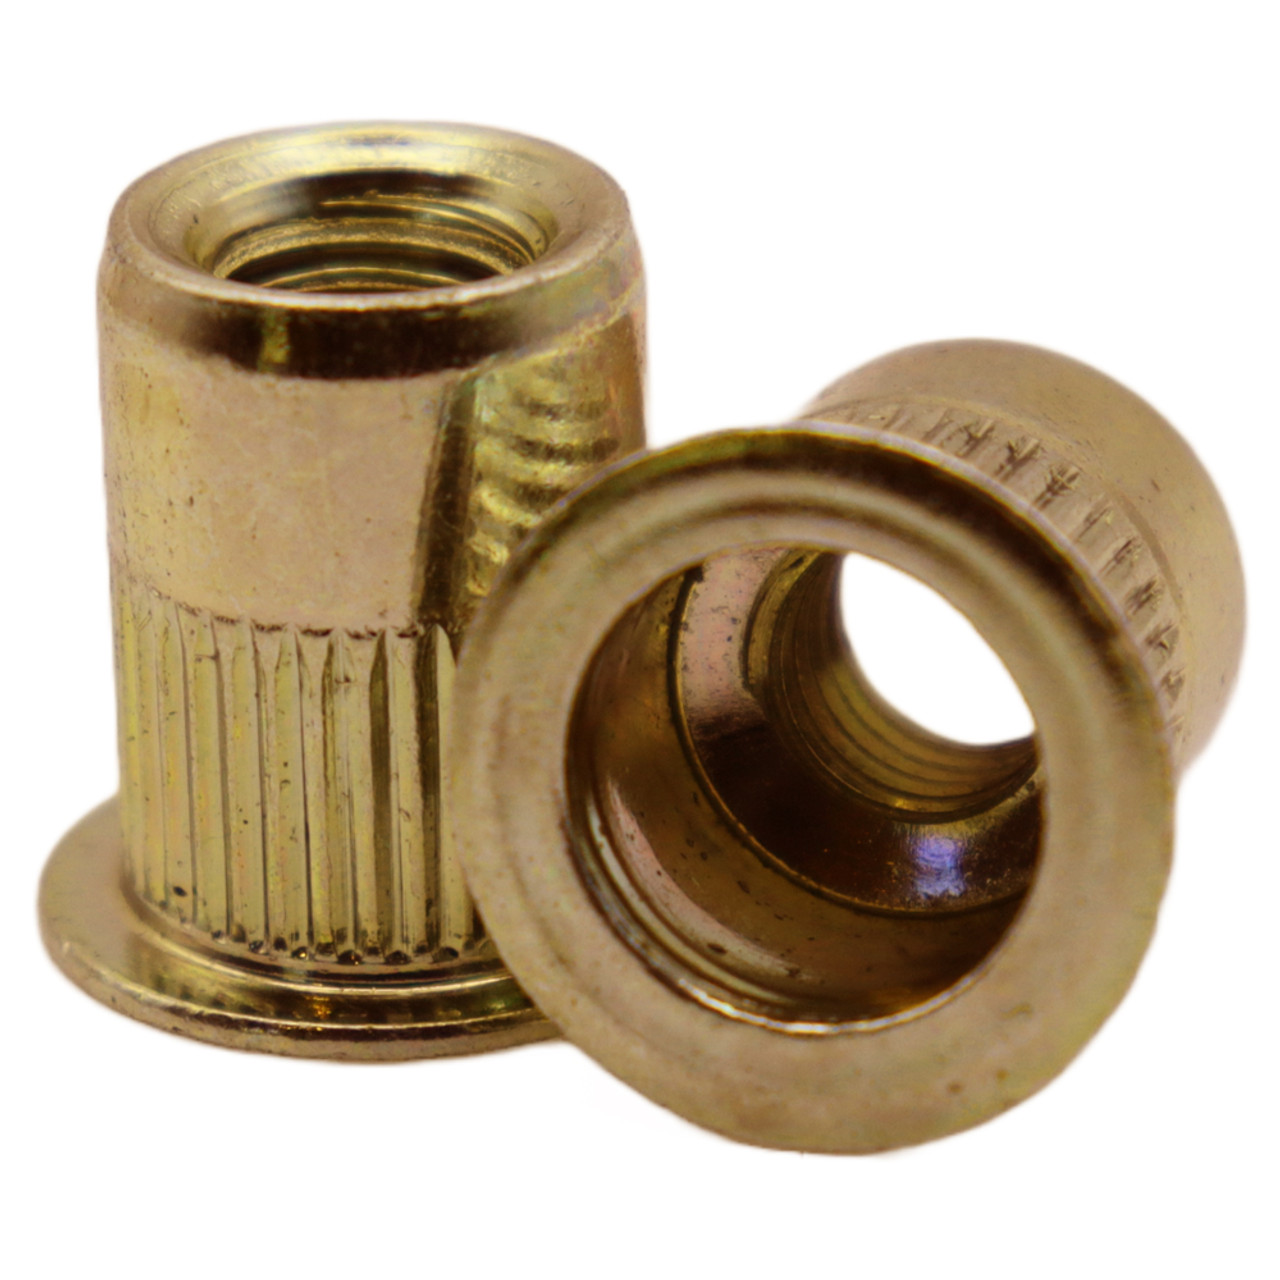 M4 x 0.70 (.51-2.03 MM) Coarse Thread Large Flange Knurled Body Rivet Nut Low Carbon Steel Yellow Zinc Plated